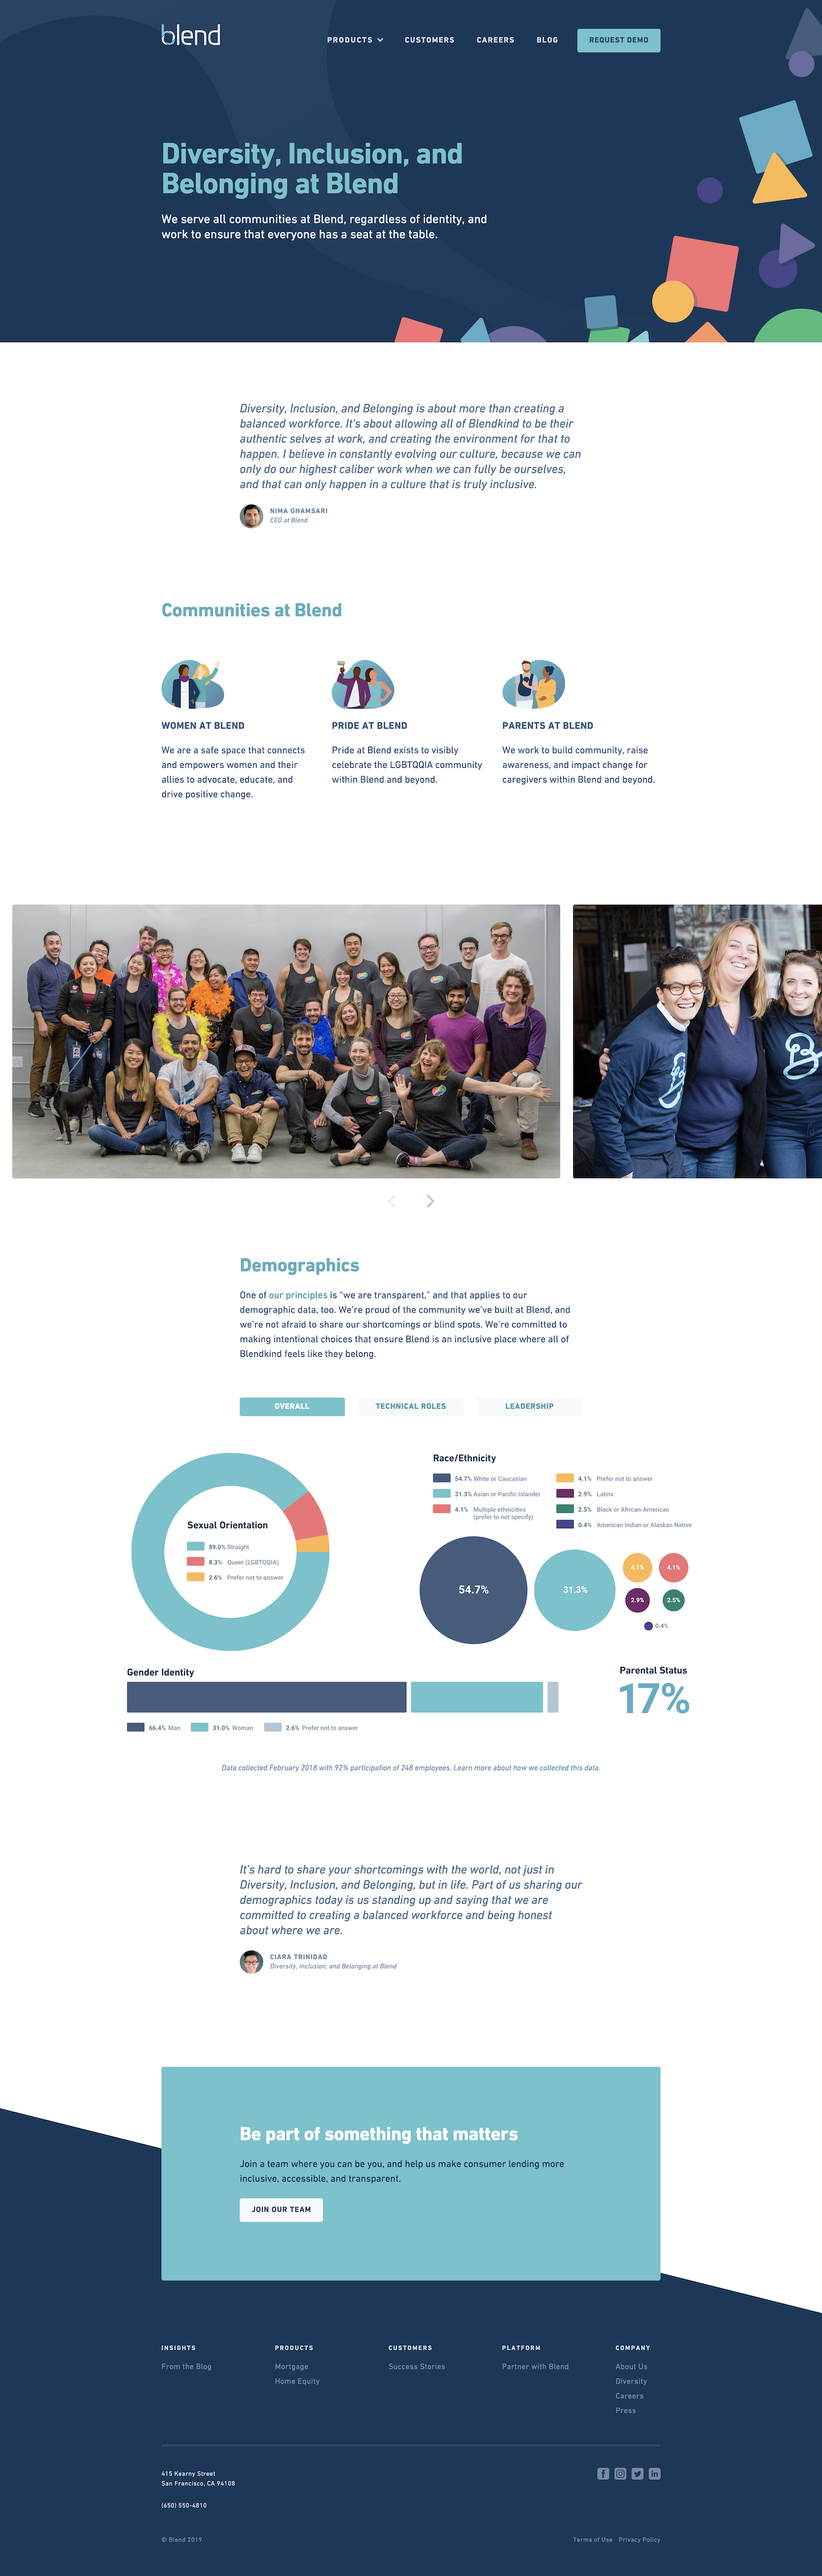 Screenshot of the Diversity & Inclusion page from the Blend website.